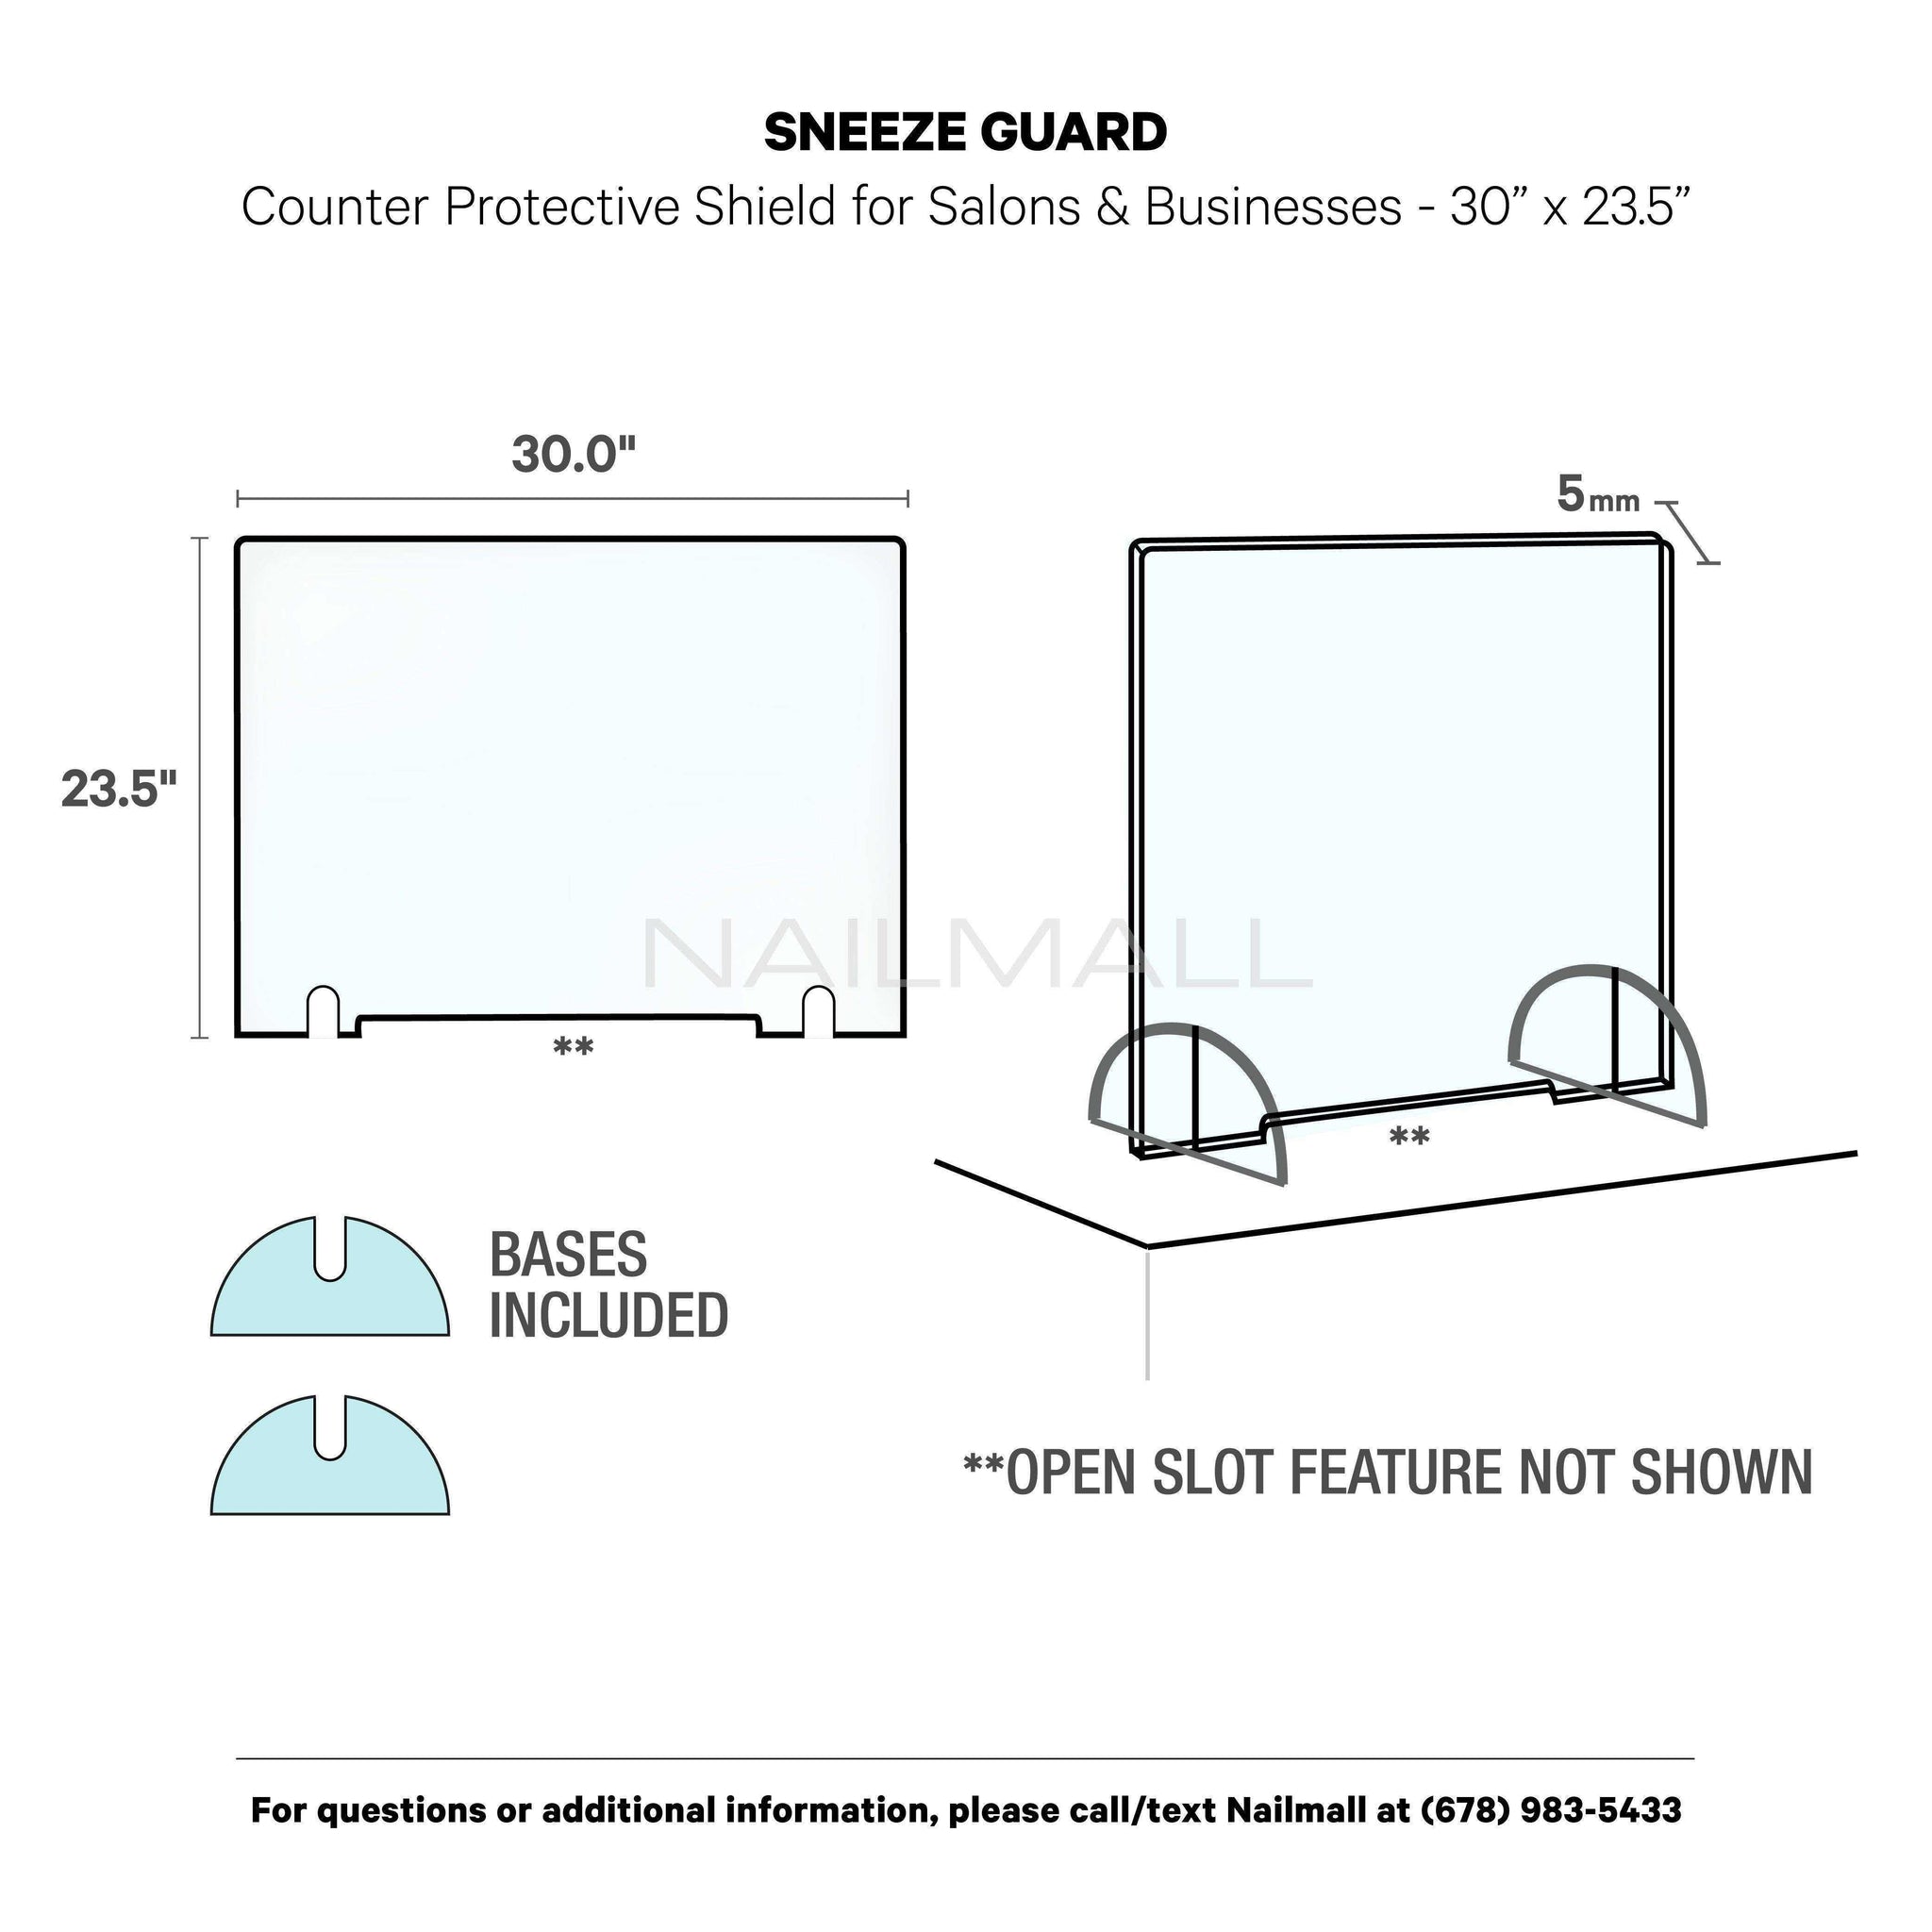 Sneeze Guard Counter Protective Shield for Salons & Businesses - 30” x 23.5”